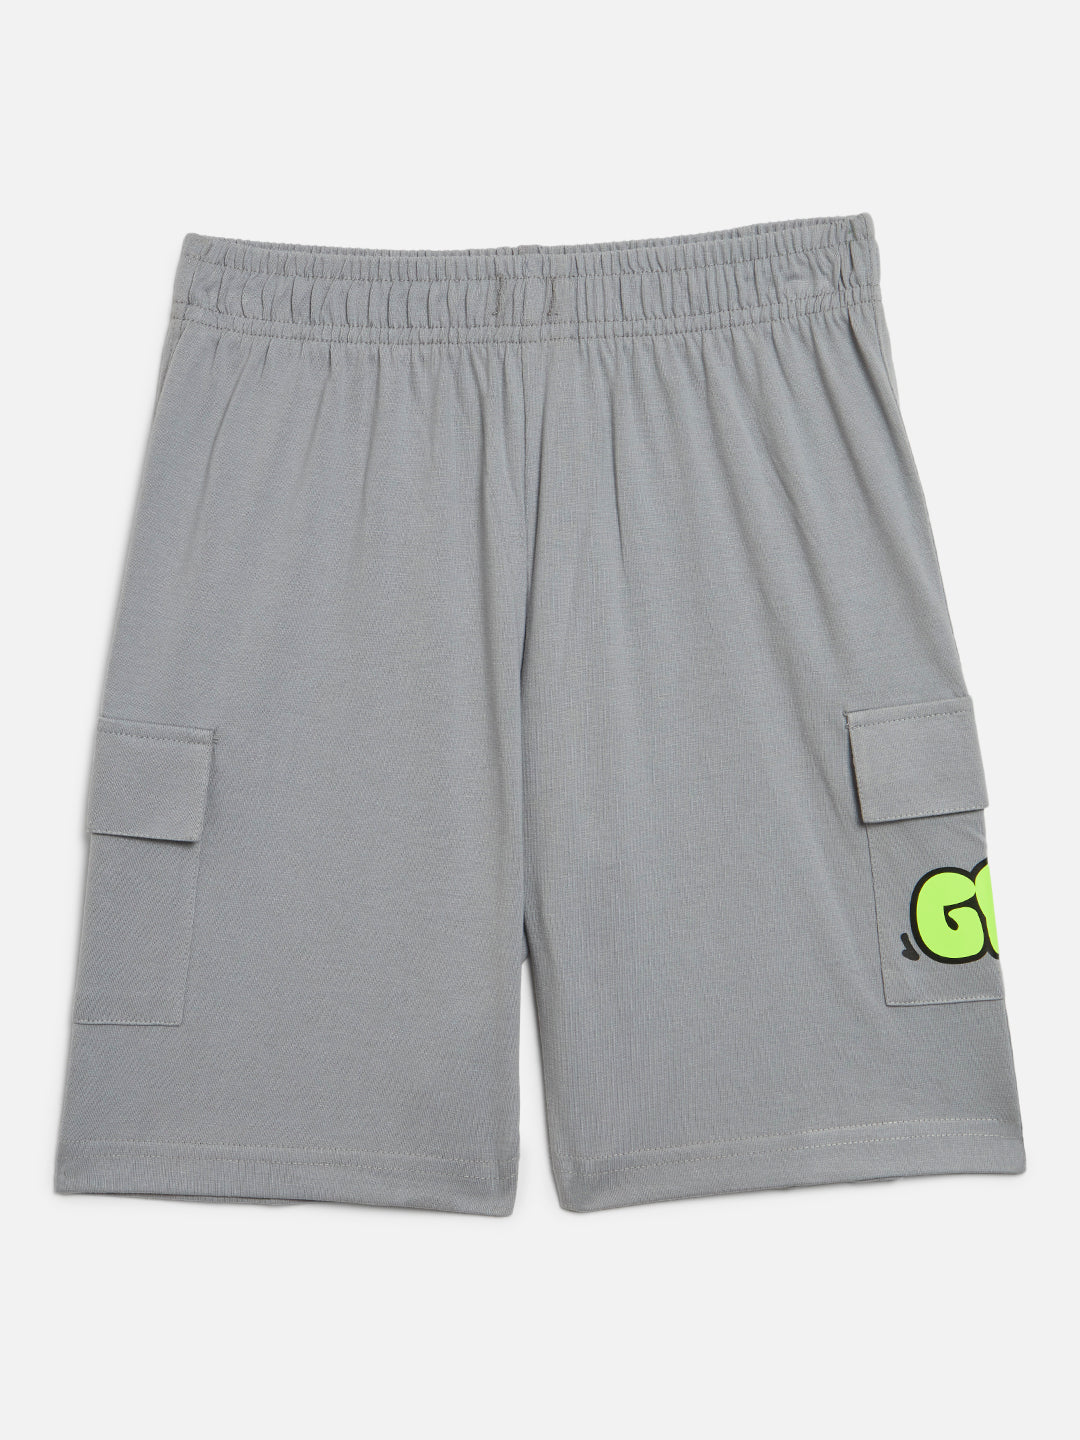 GRIFFEL Boys Kids Steel Grey Co-Ord T-shirt and Short Set - griffel